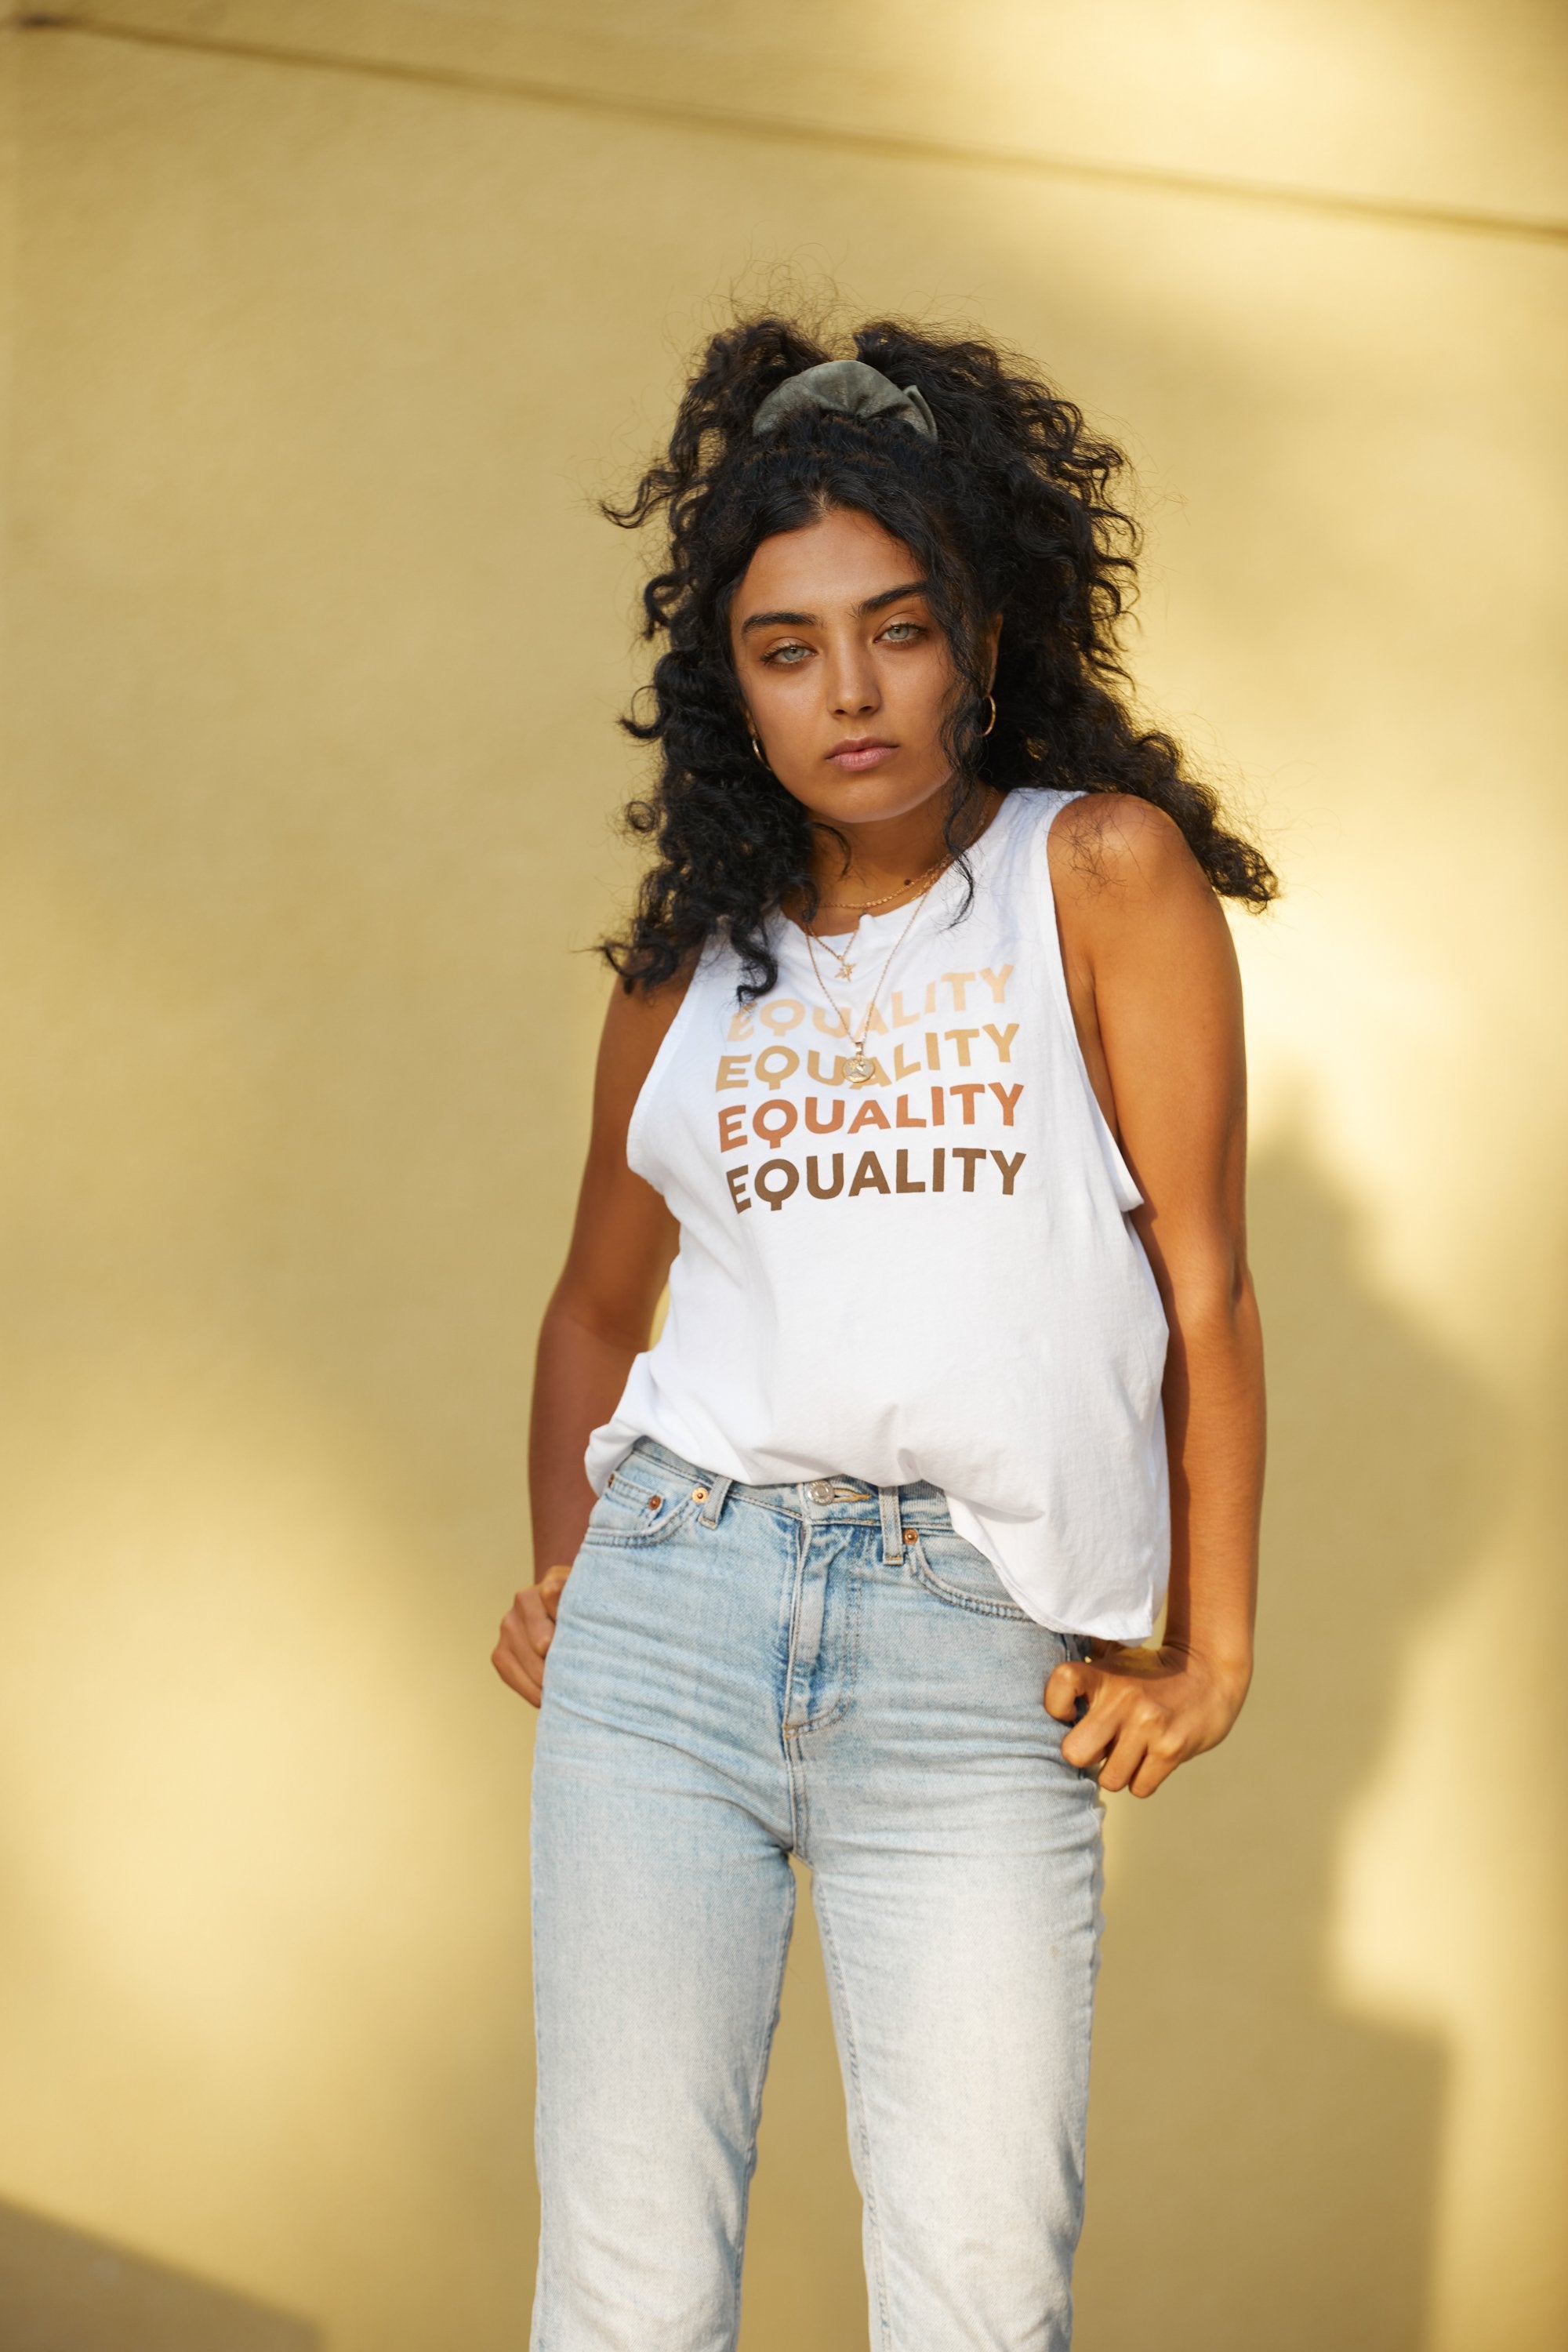 white tank top with tan equality messaging